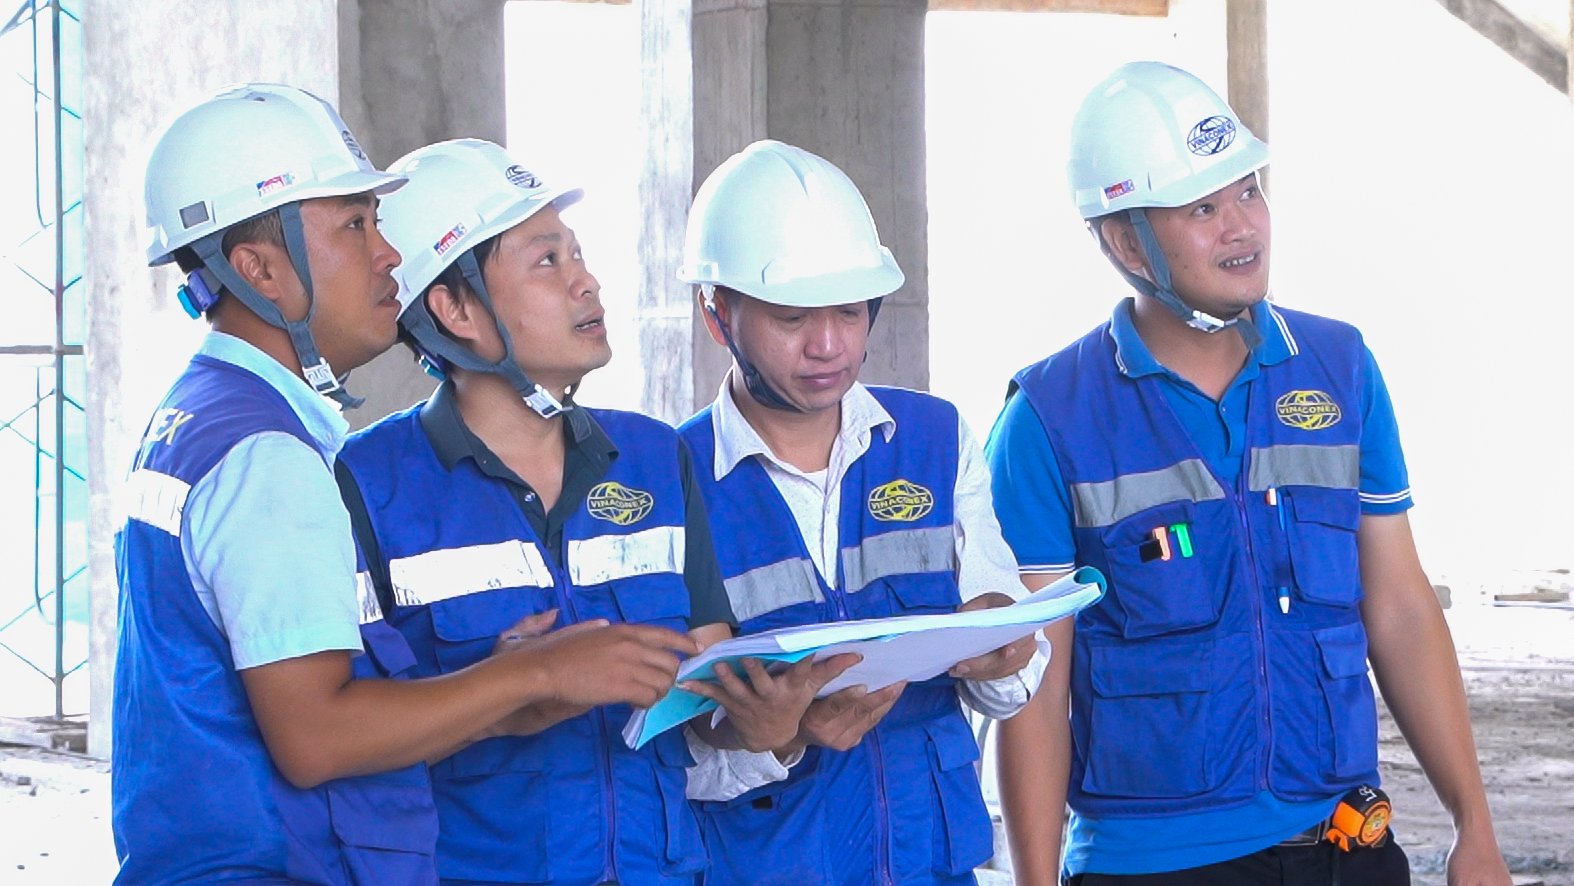 VINACONEX IS DEDICATED TO COMPLETING THE NAM DINH PROVINCIAL GENERAL HOSPITAL PROJECT ON TIME.